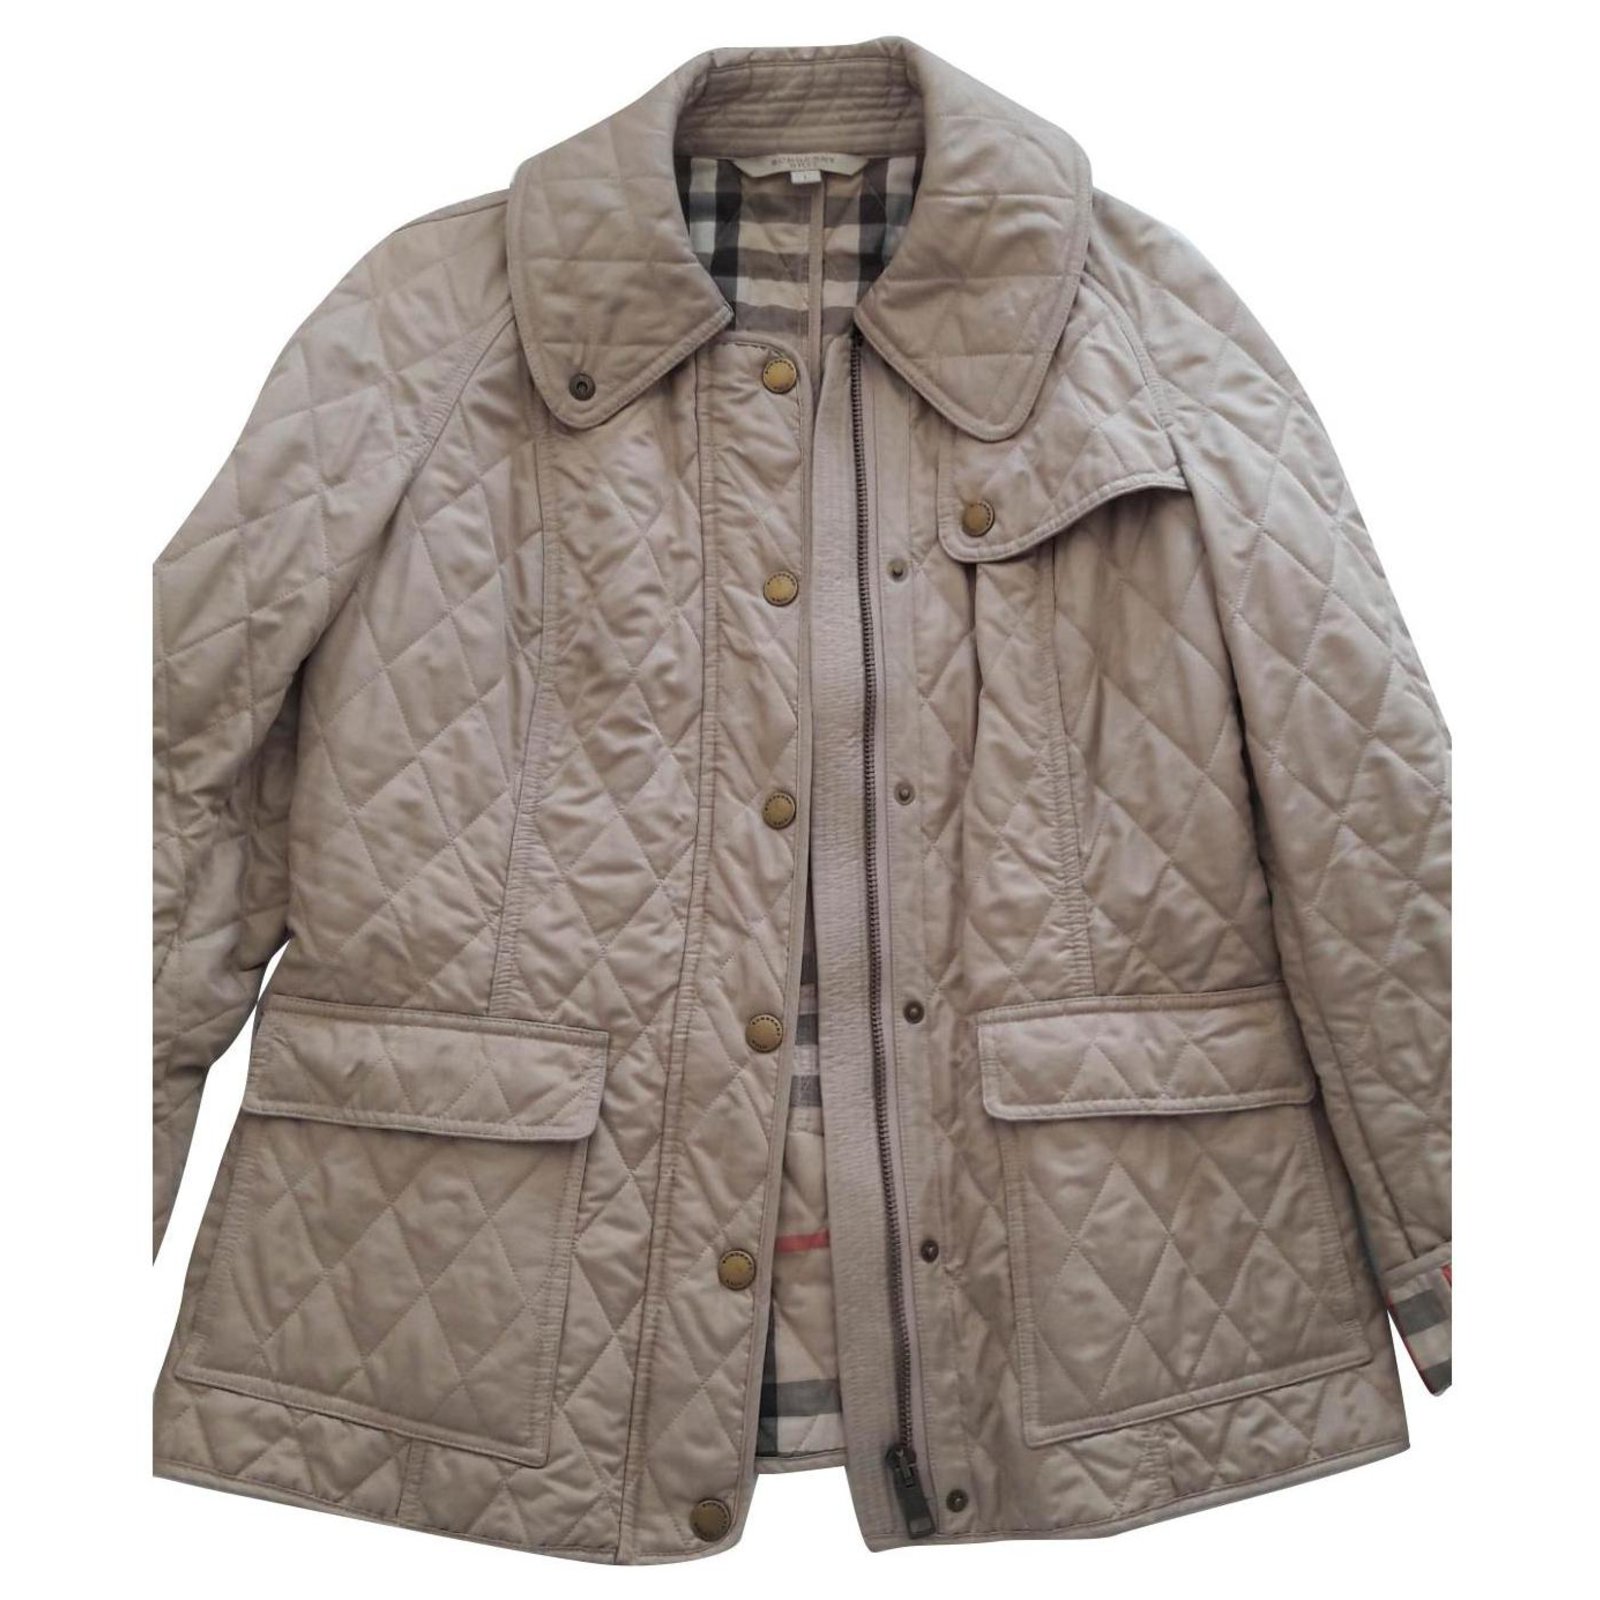 Burberry classic beige quilted jacket, size L